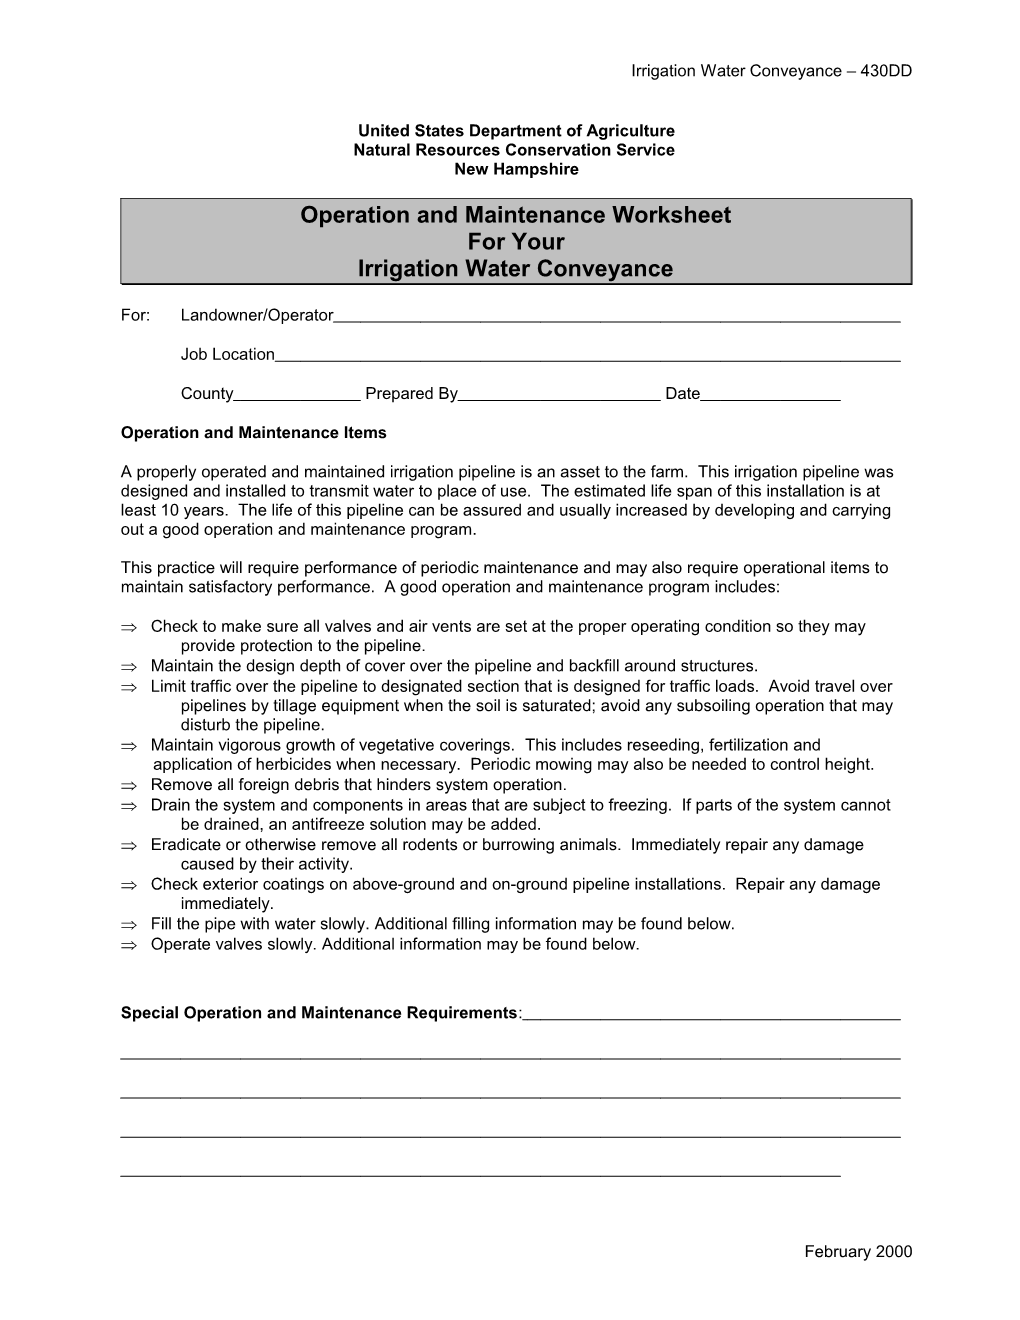 Operation and Maintenance Worksheet for Your Irrigation Water Conveyance